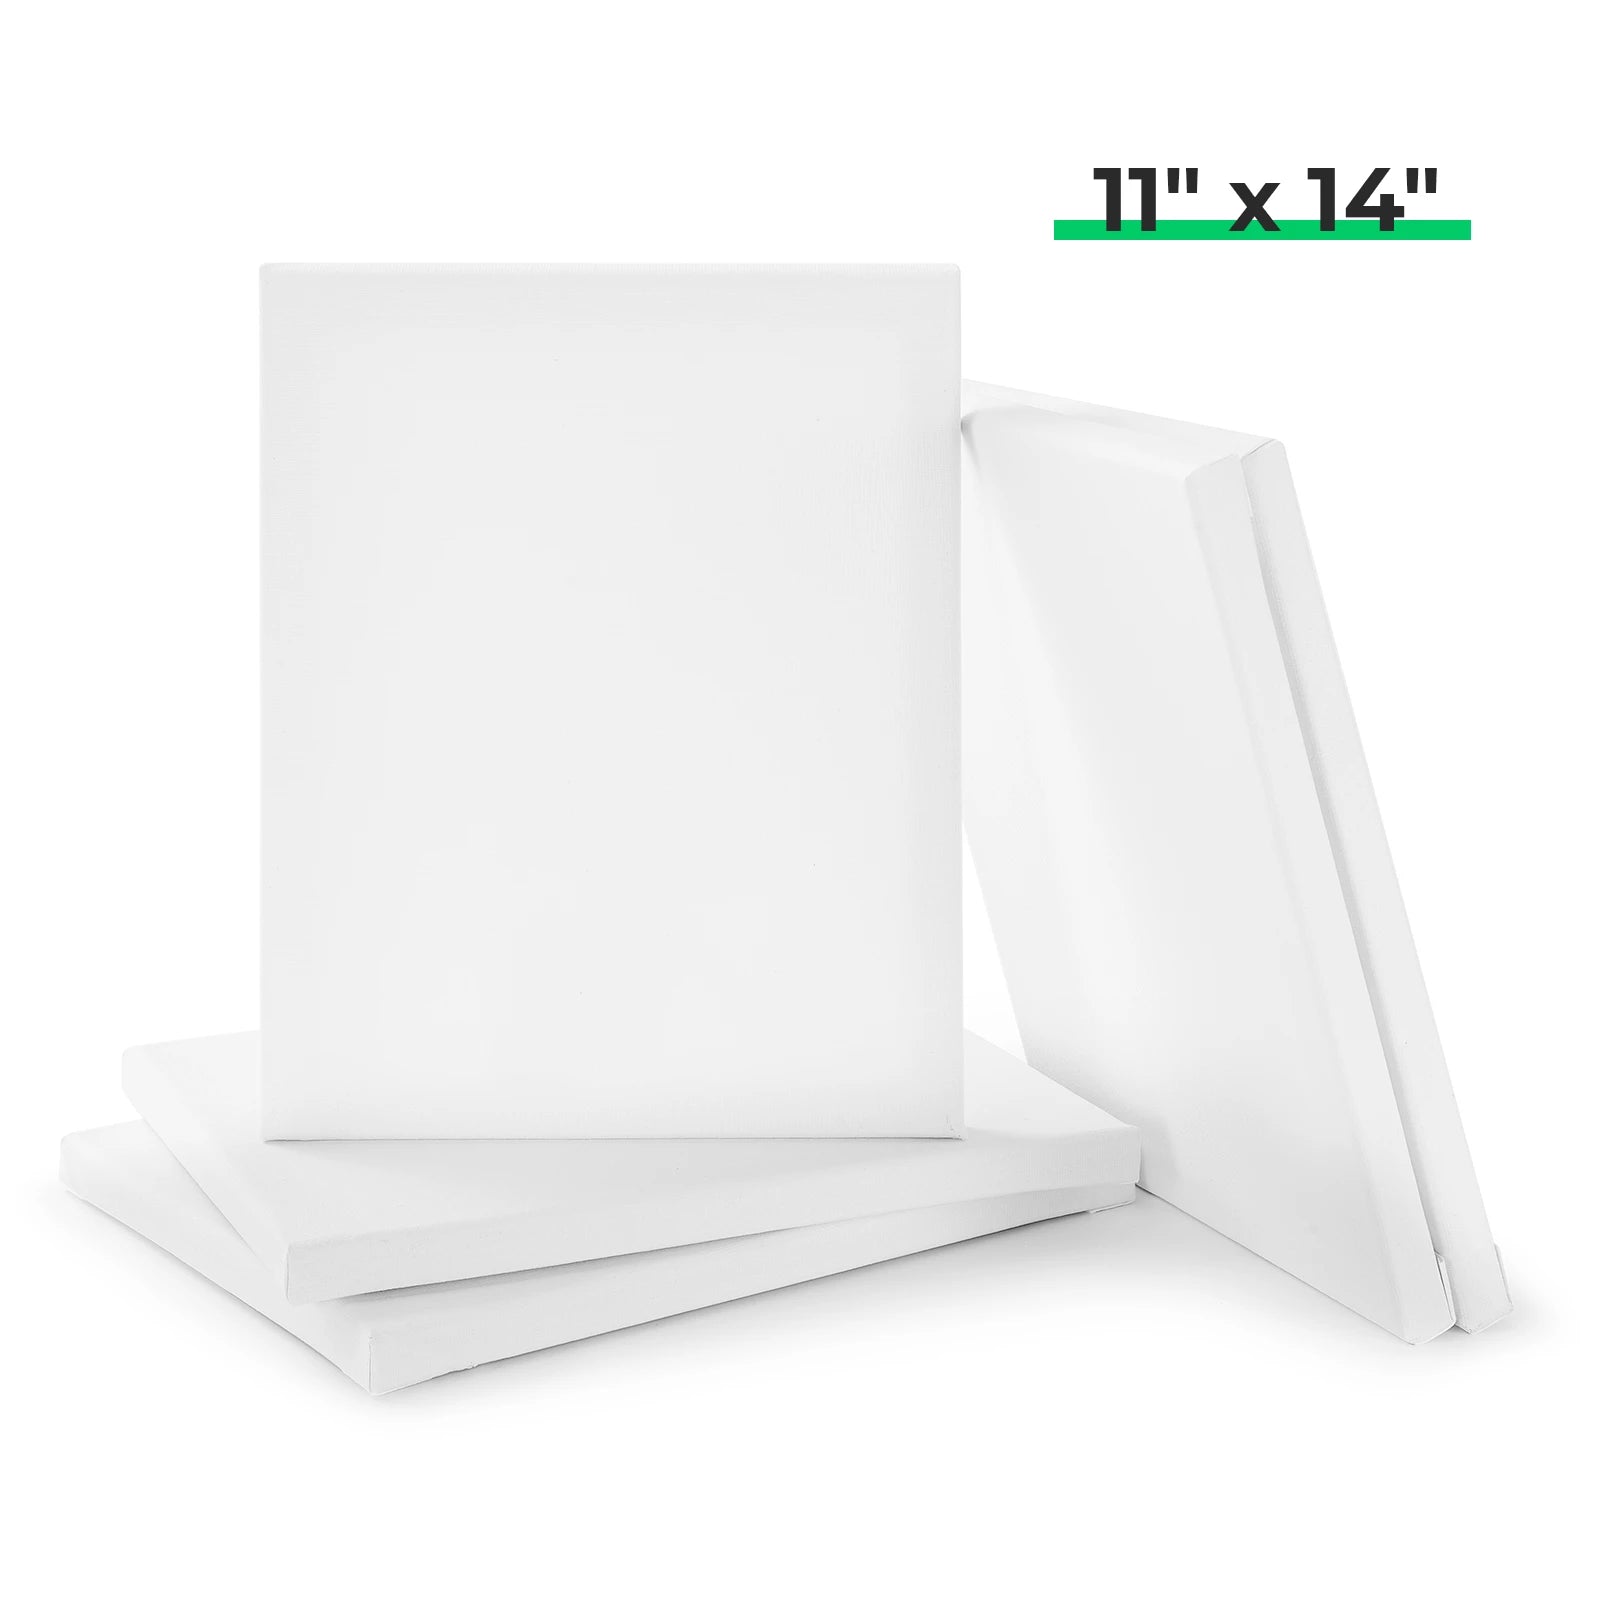 Canvas for Painting (5pcs)